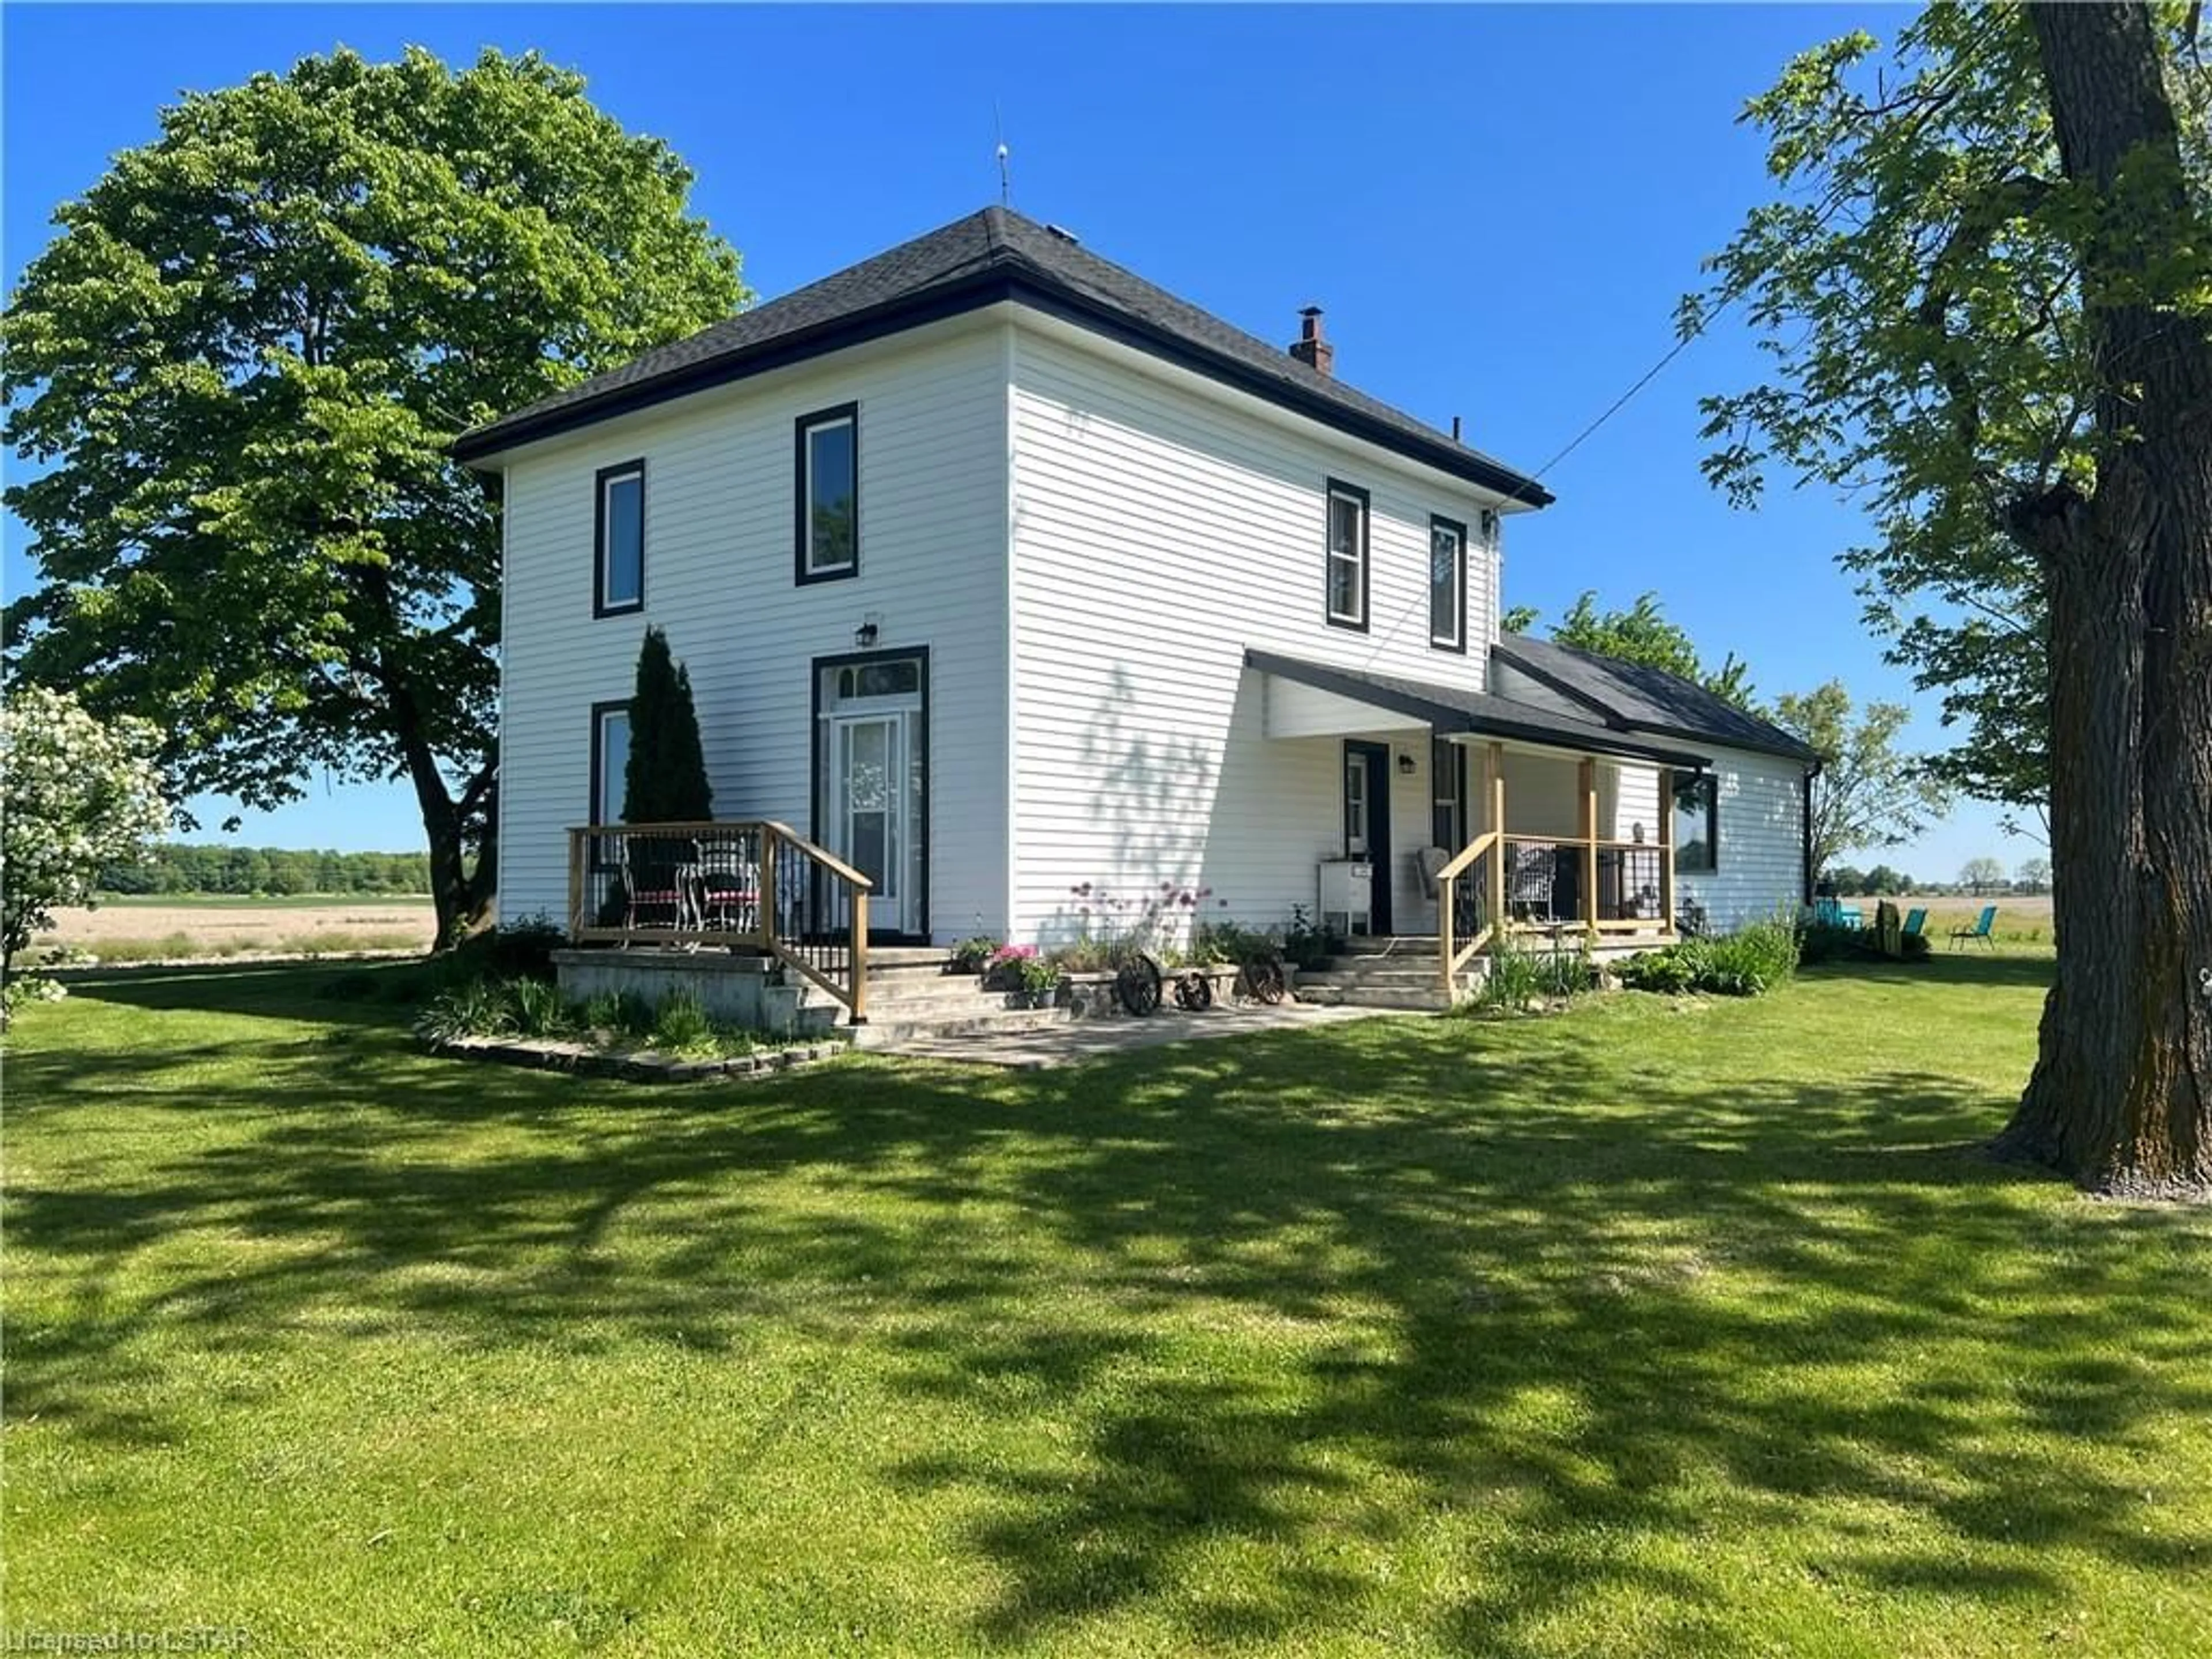 Cottage for 22410 Mcarthur Rd, Appin Ontario N0L 1A0